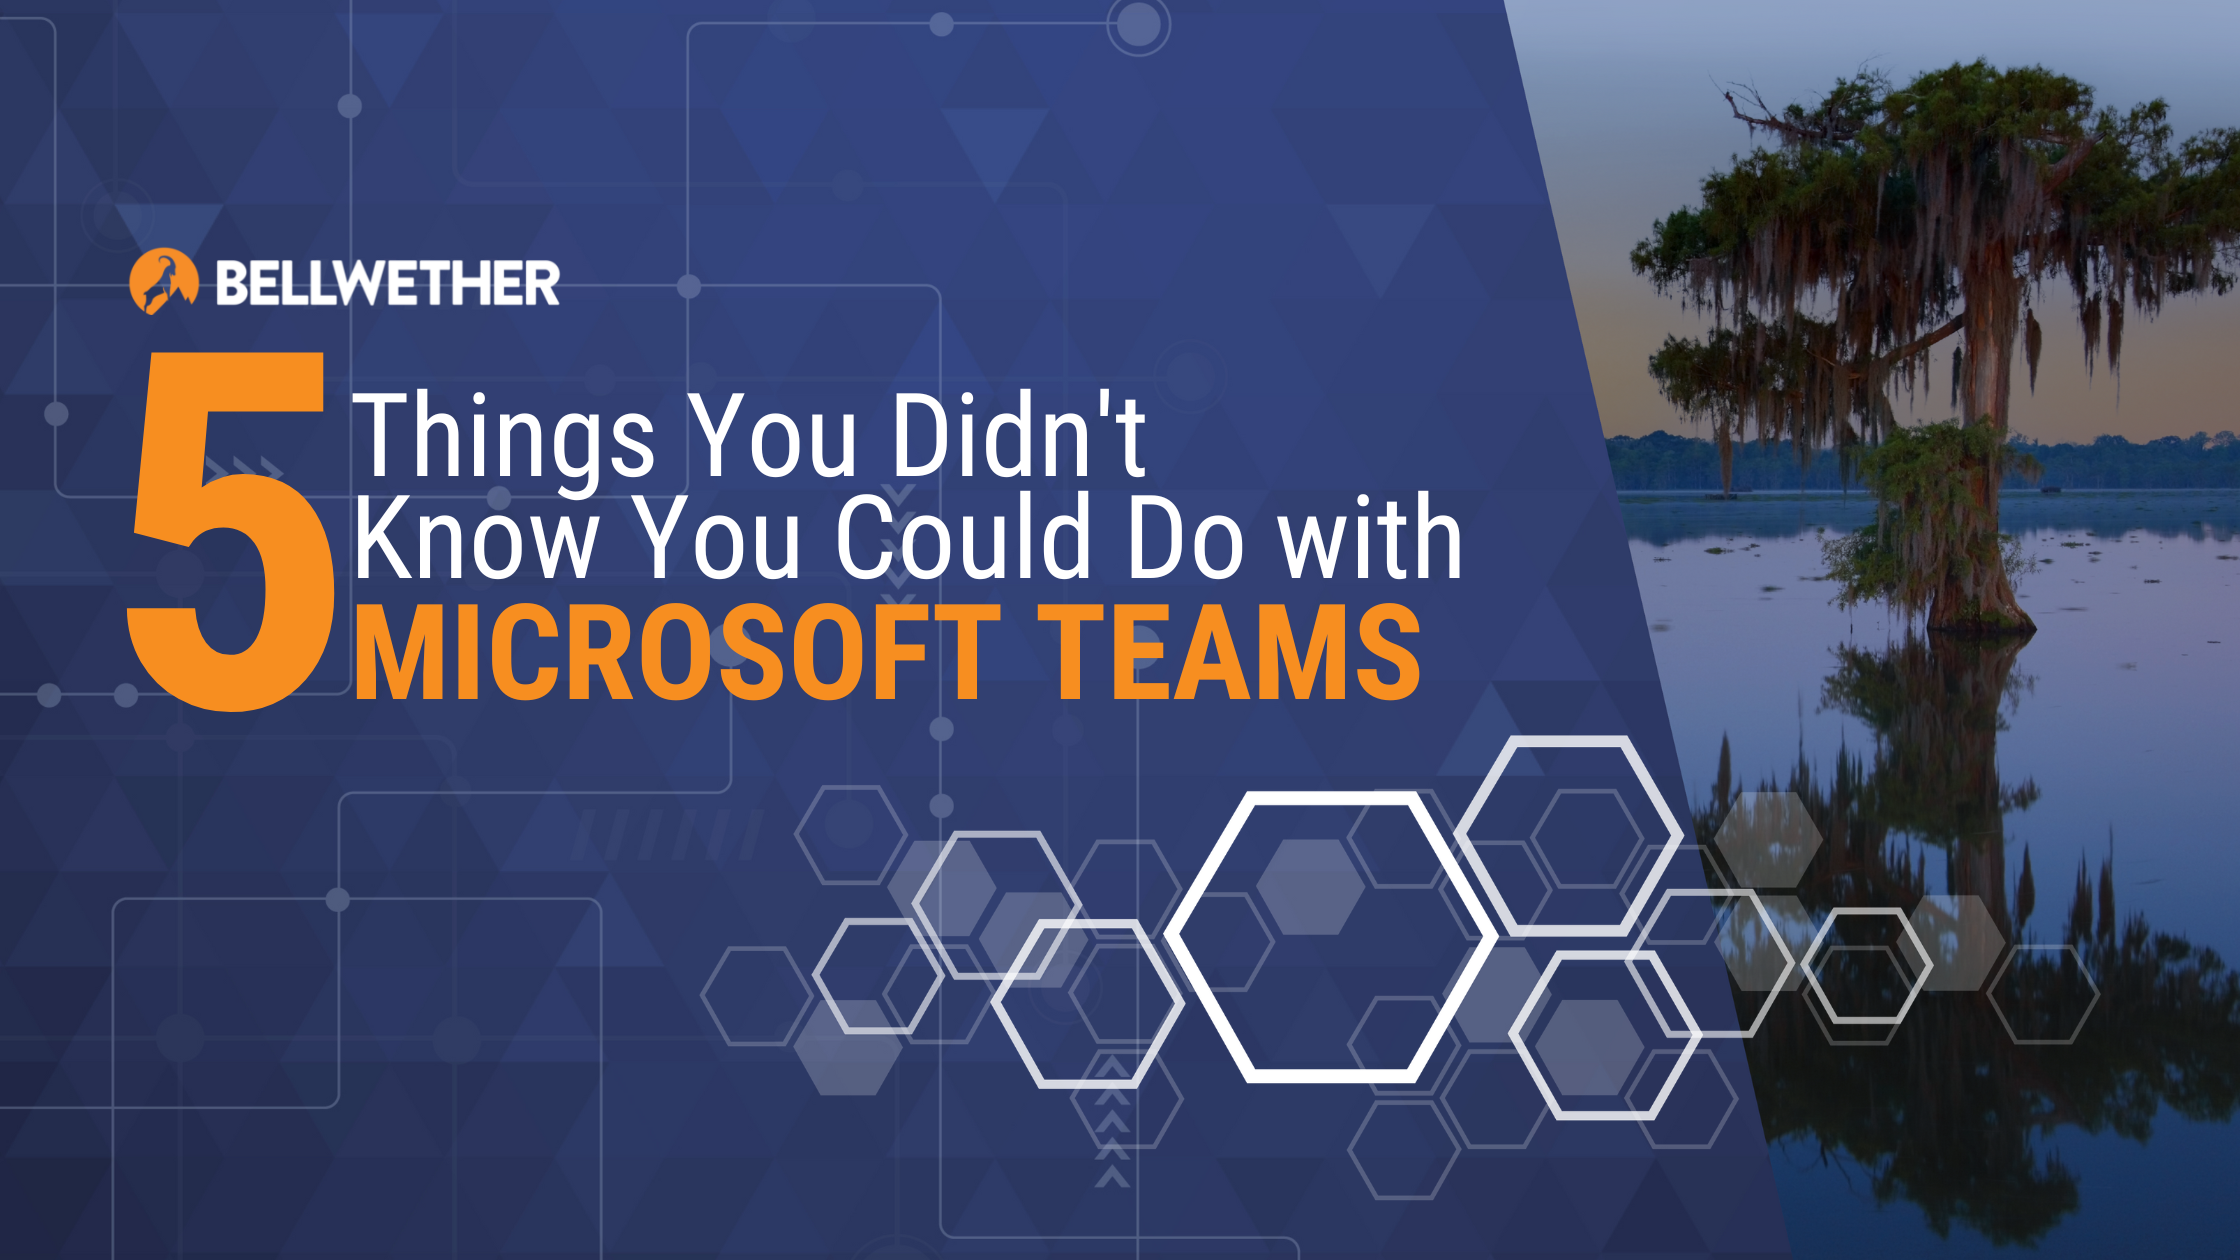 5 Things You Didn’t Know You Could Do with Microsoft Teams